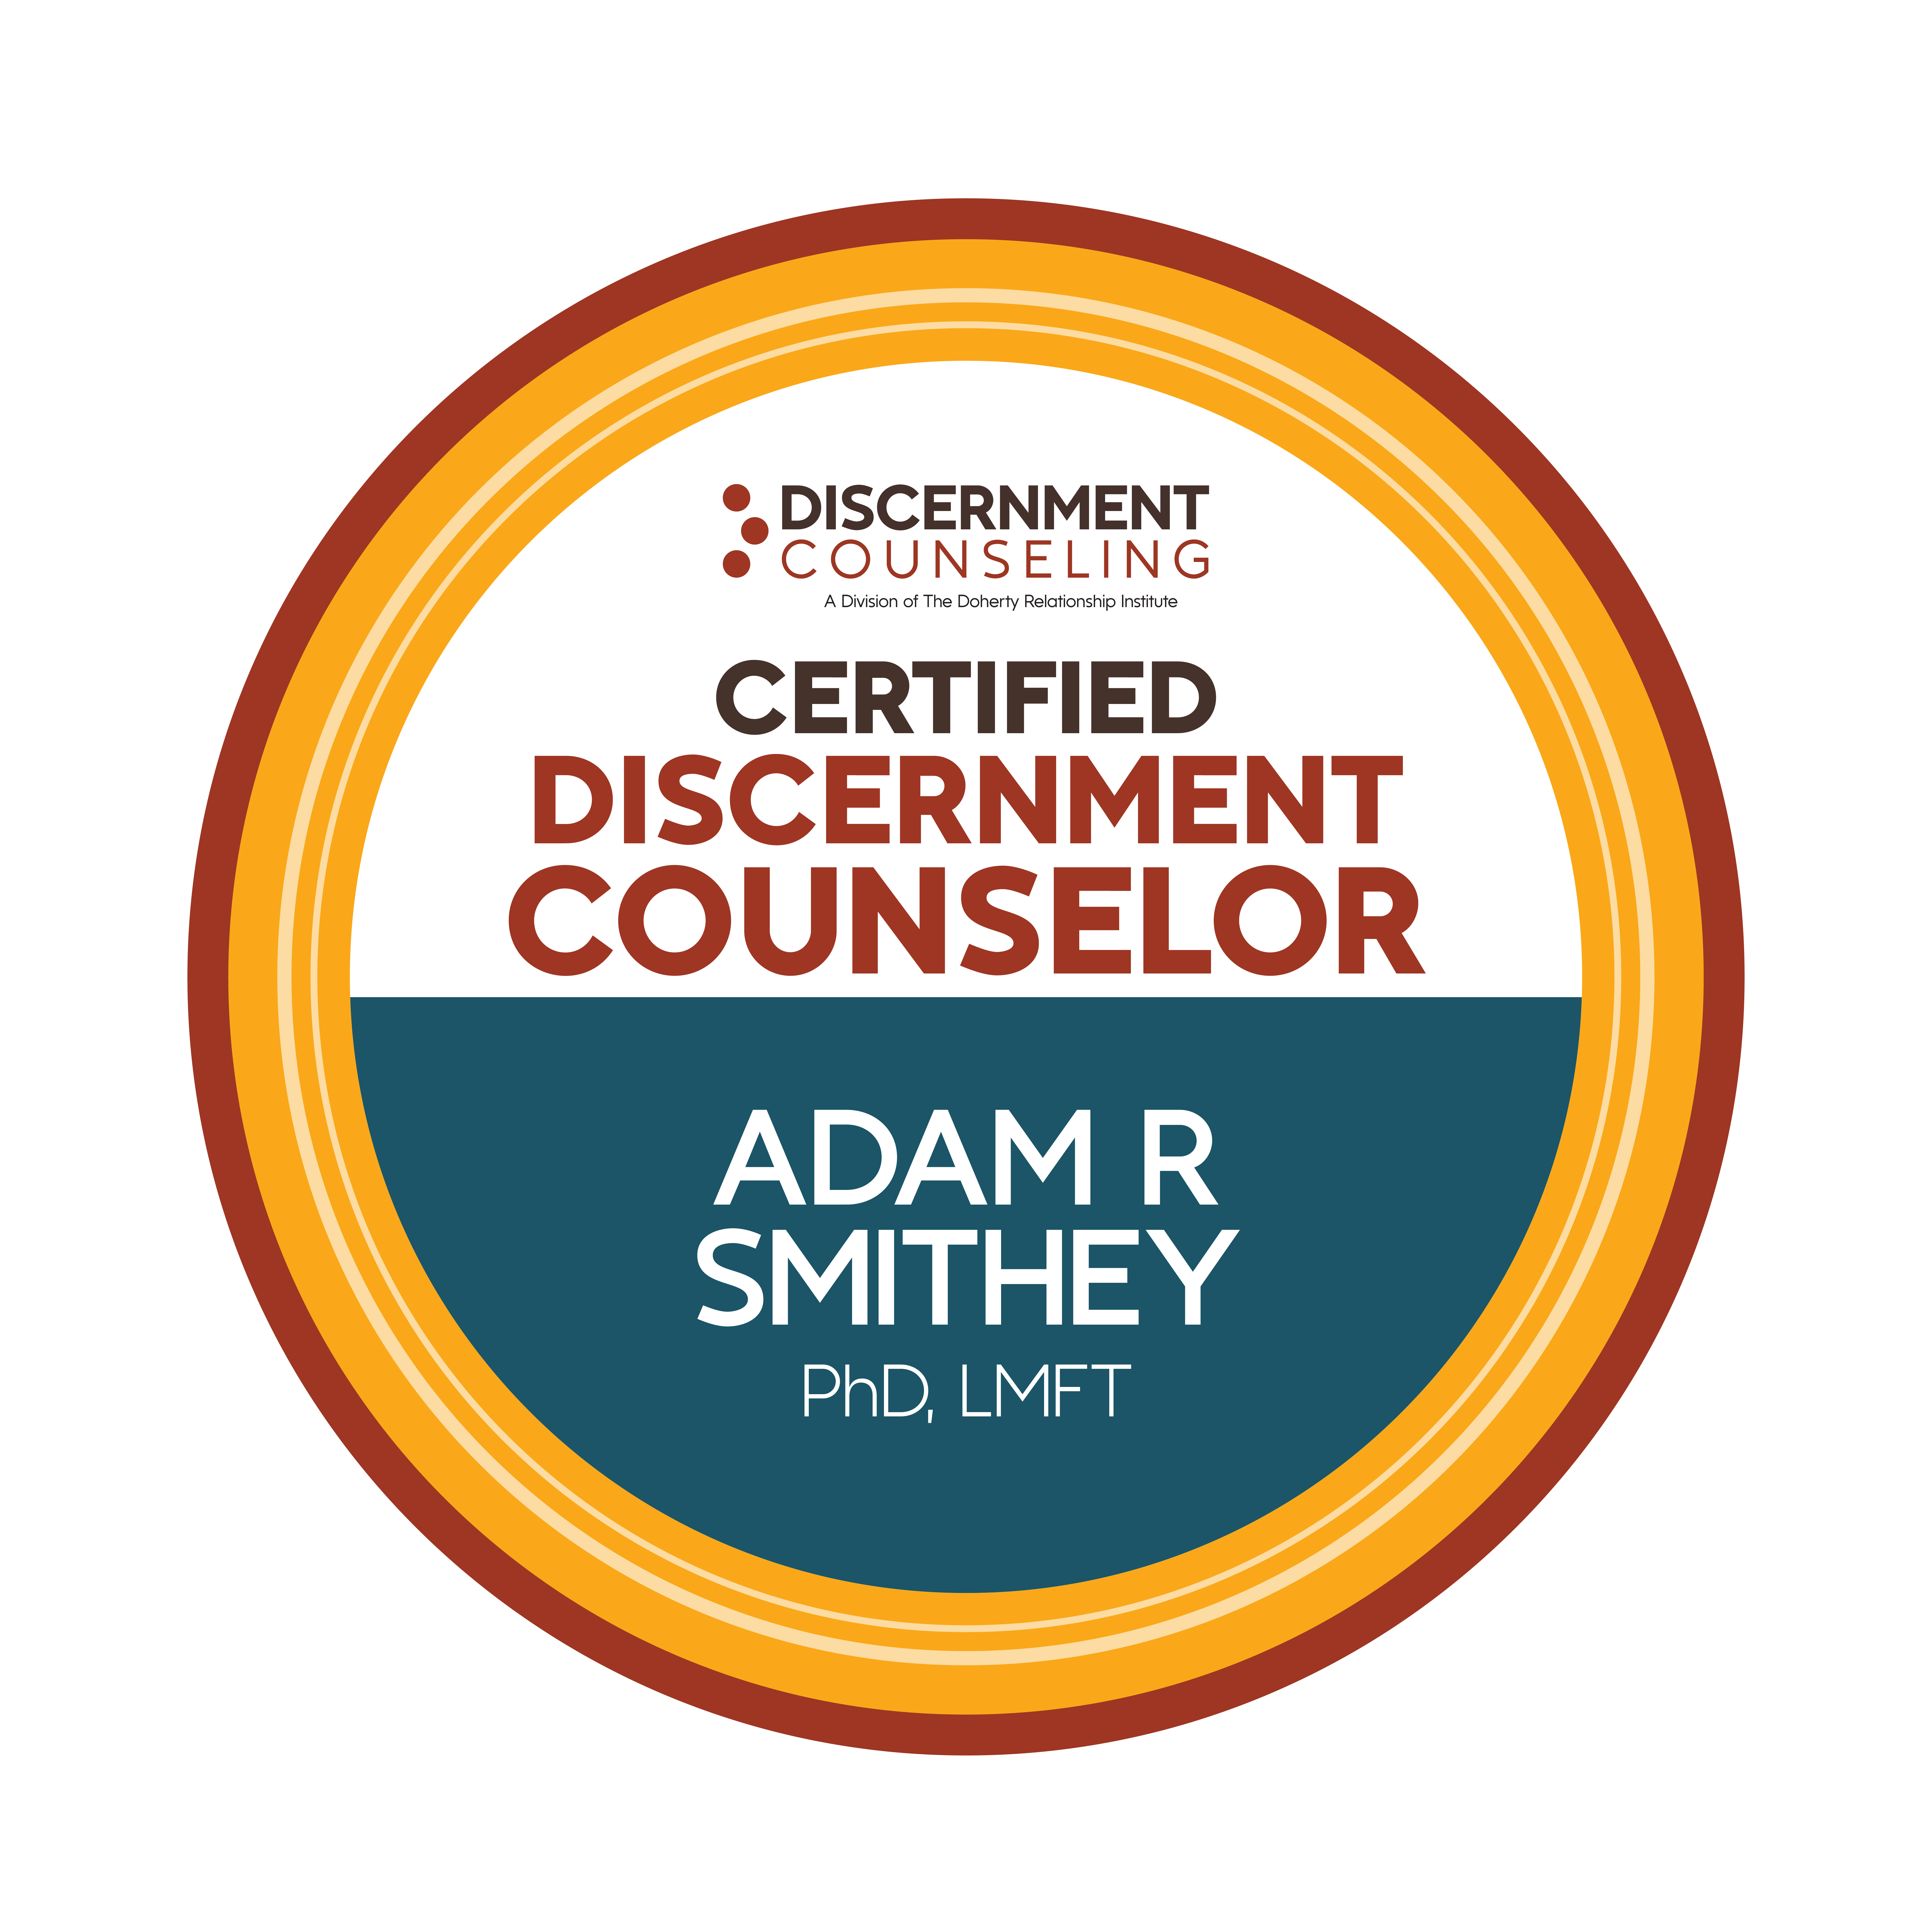 Discernment Counseling by Bill Doherty